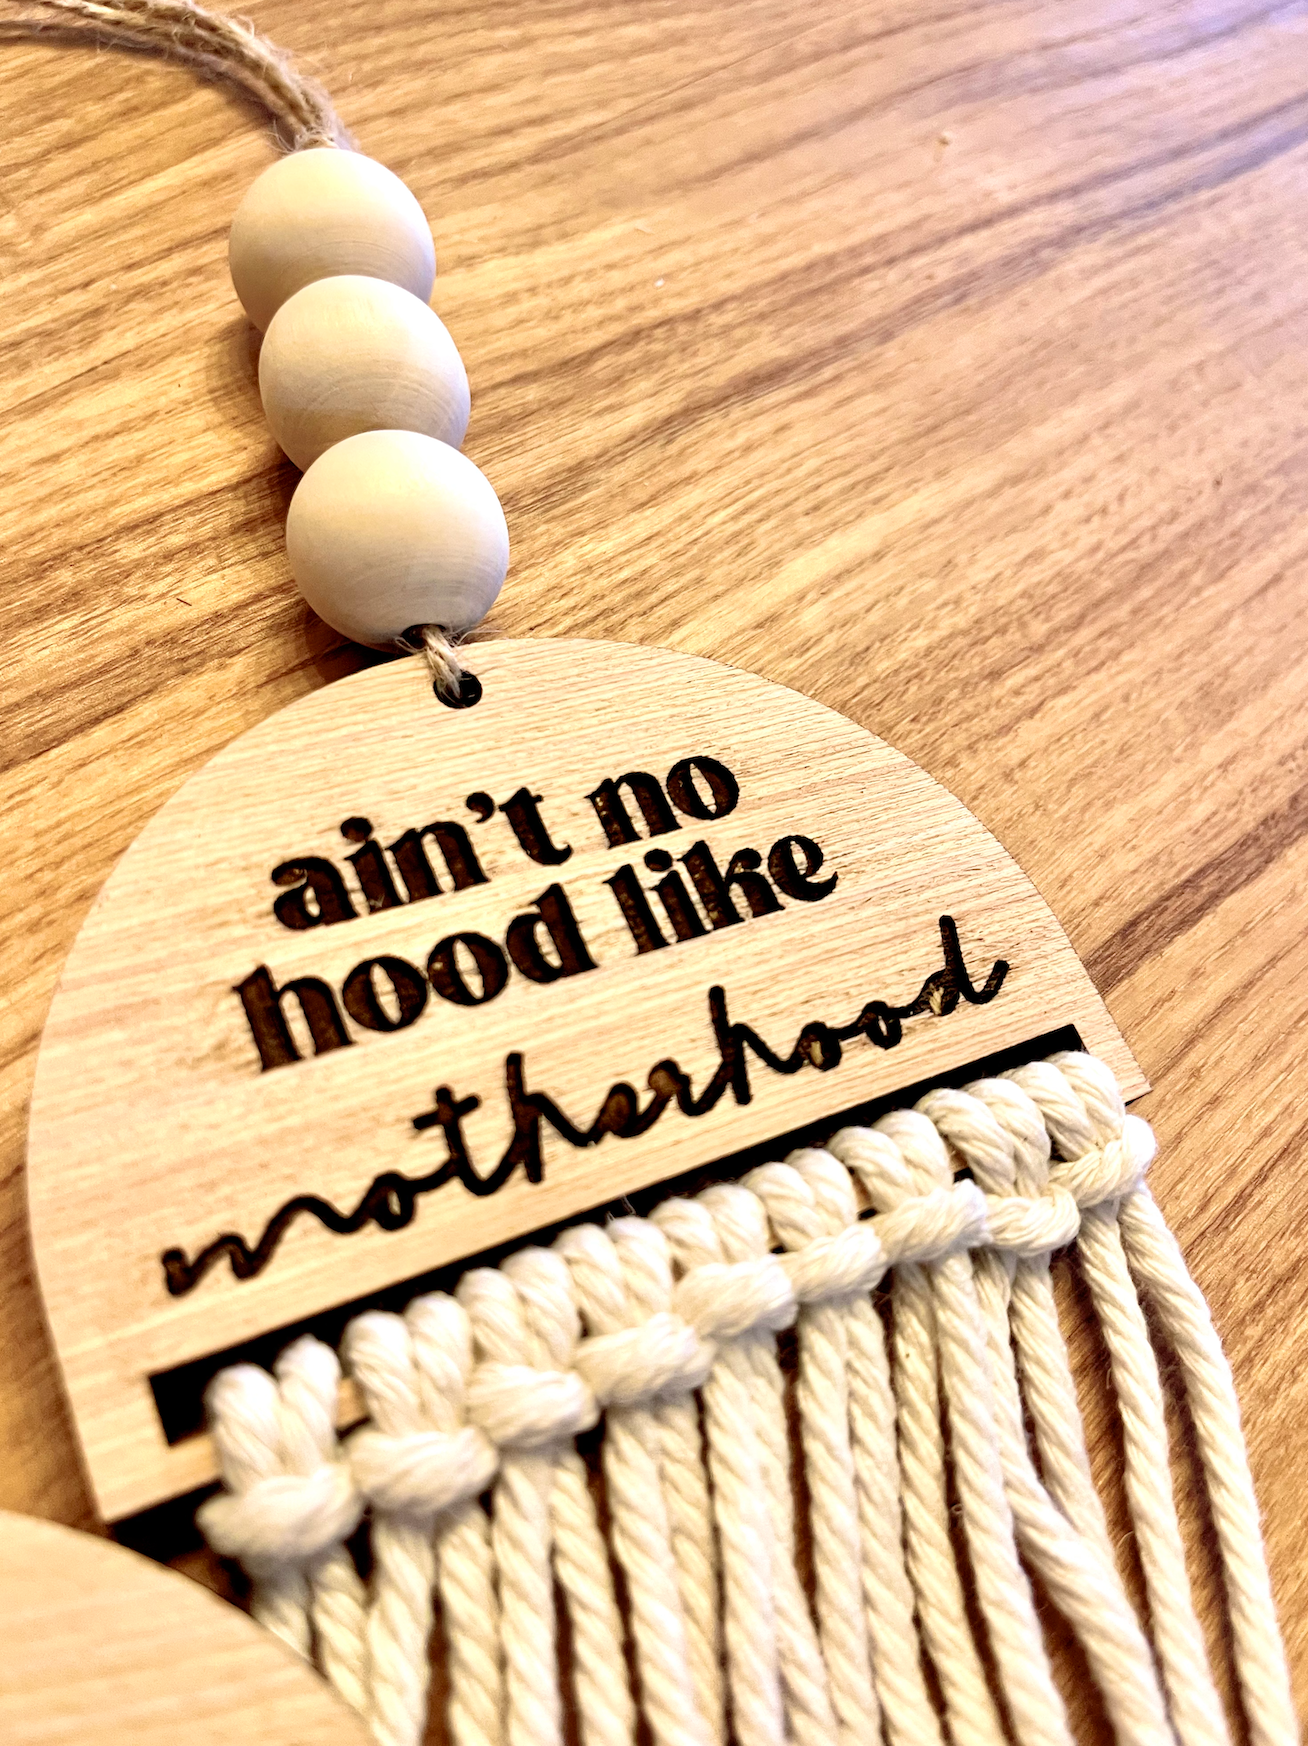 Mama Aint no hood like motherhood mothers day Car Charm Review Mirror wood sign Hanging Tag Bead Active